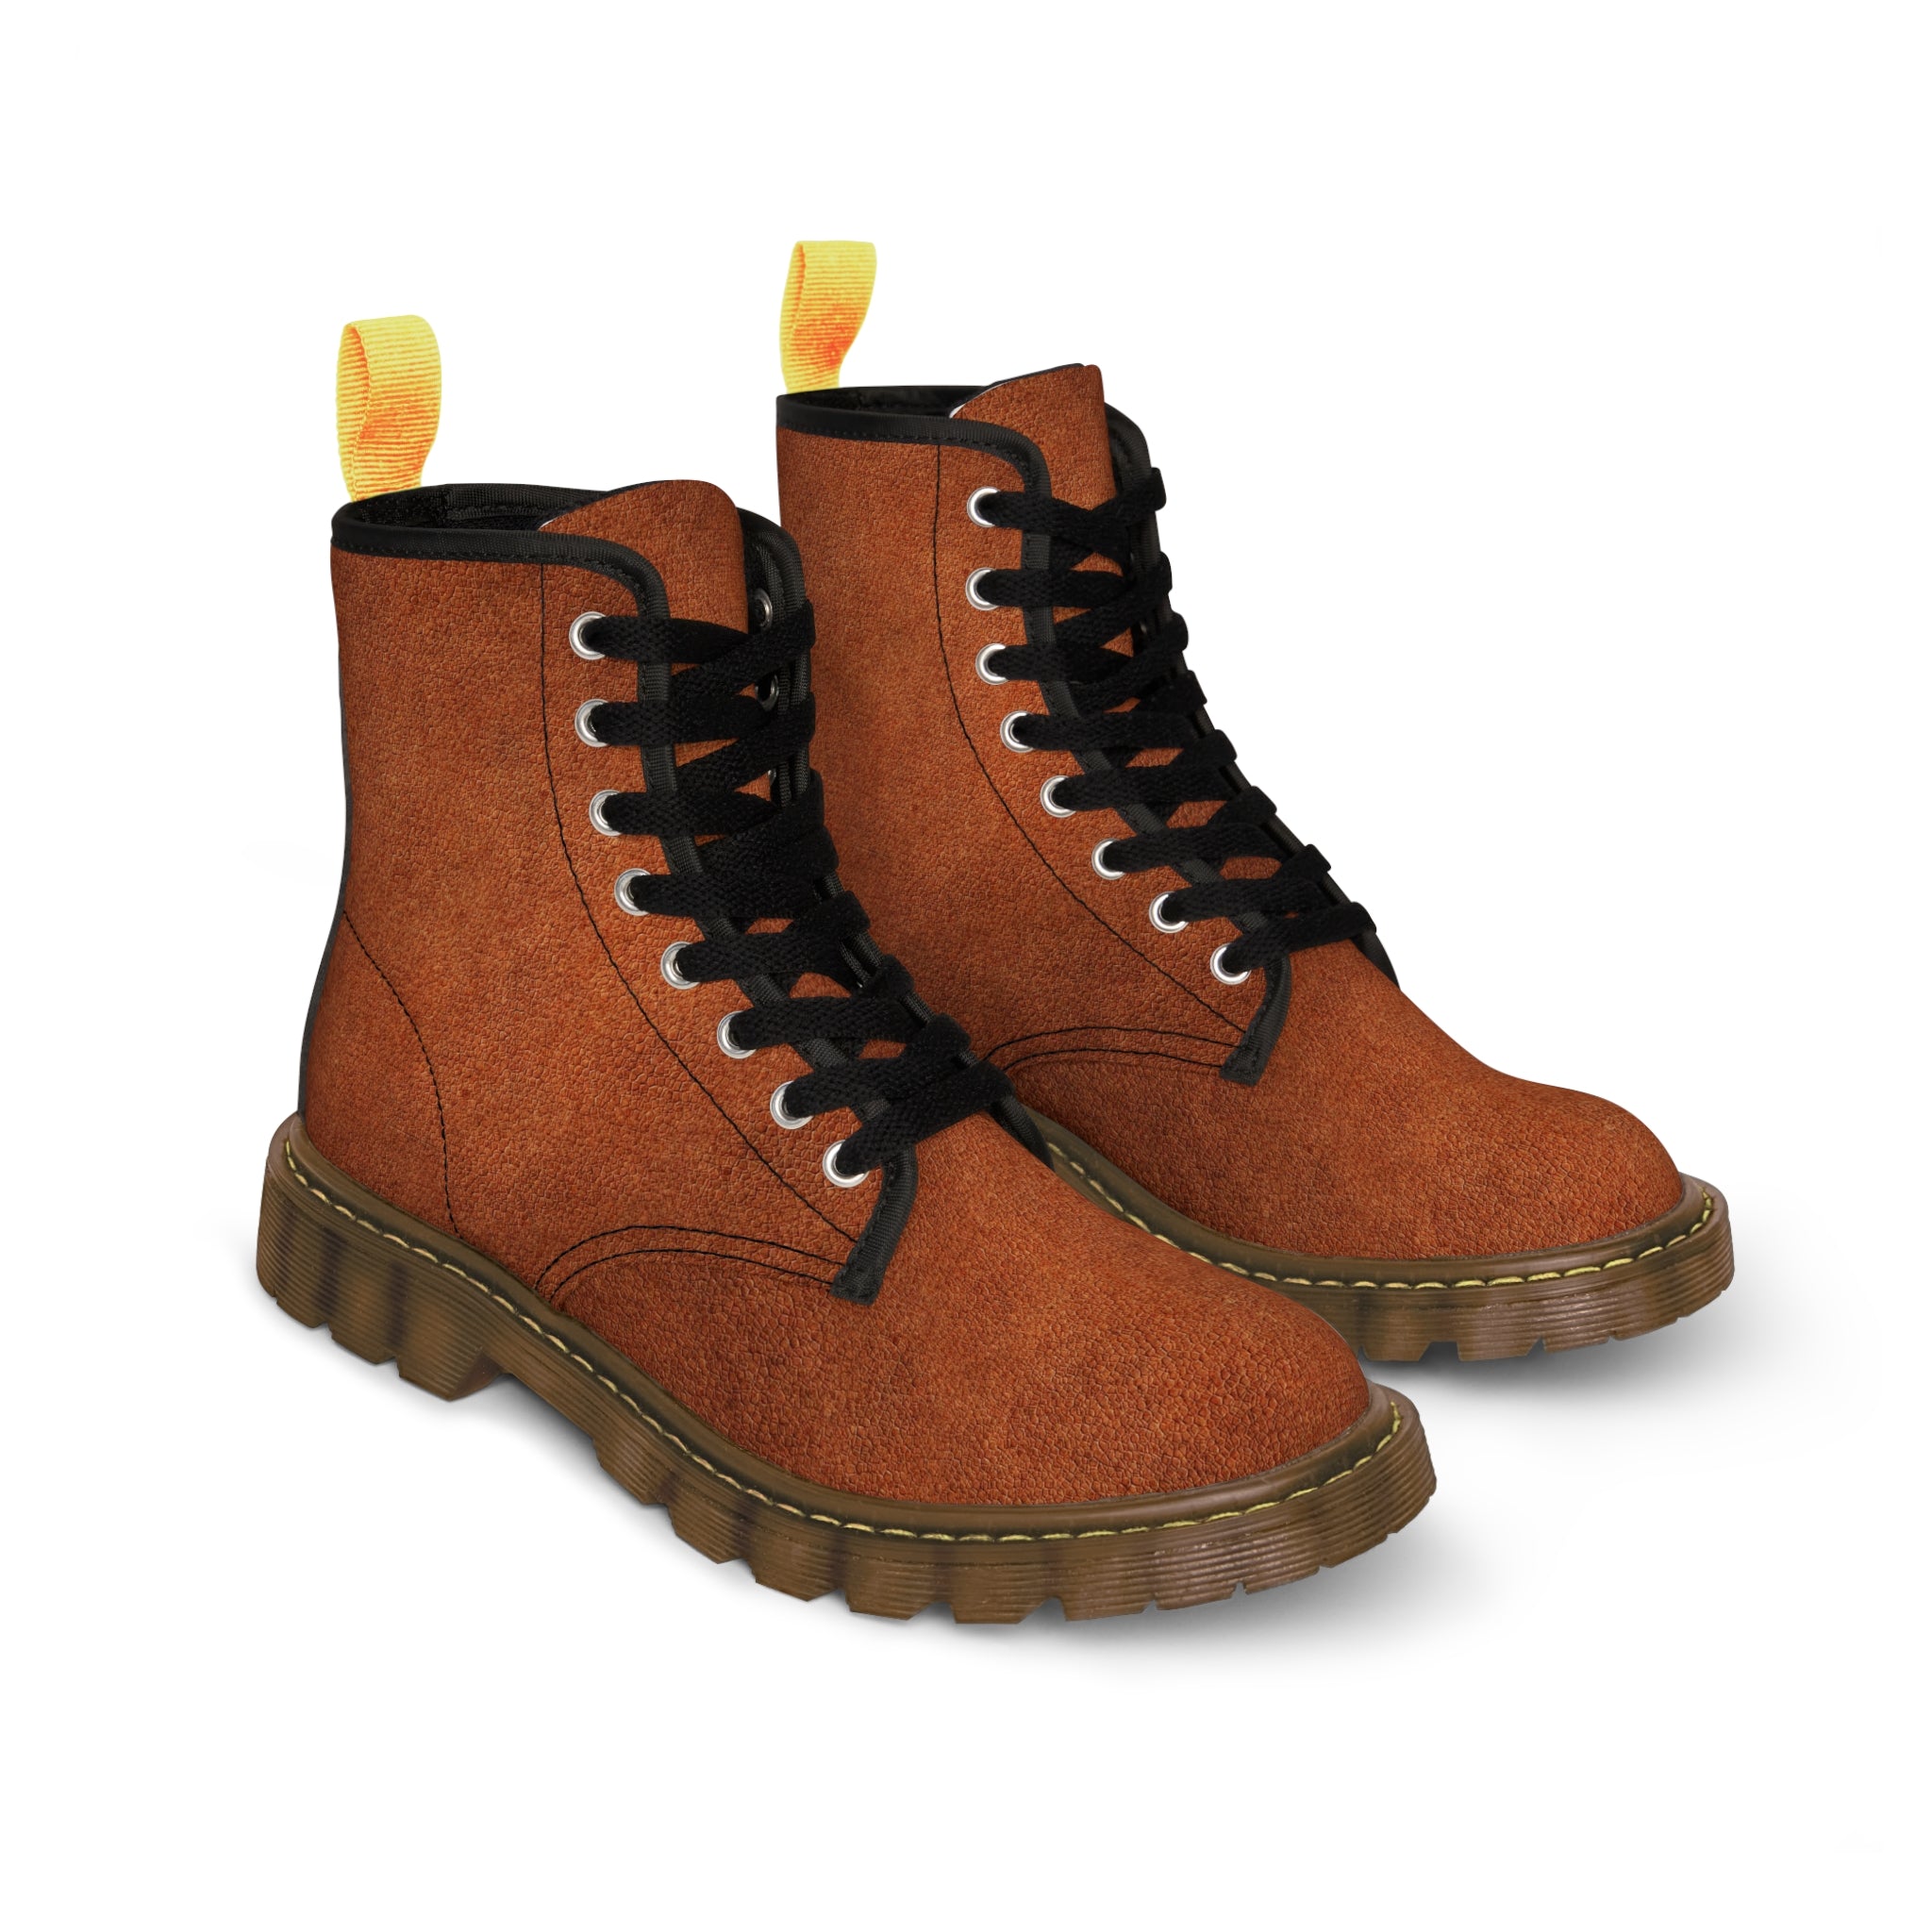 Men's Canvas Leather Look Brown Boots